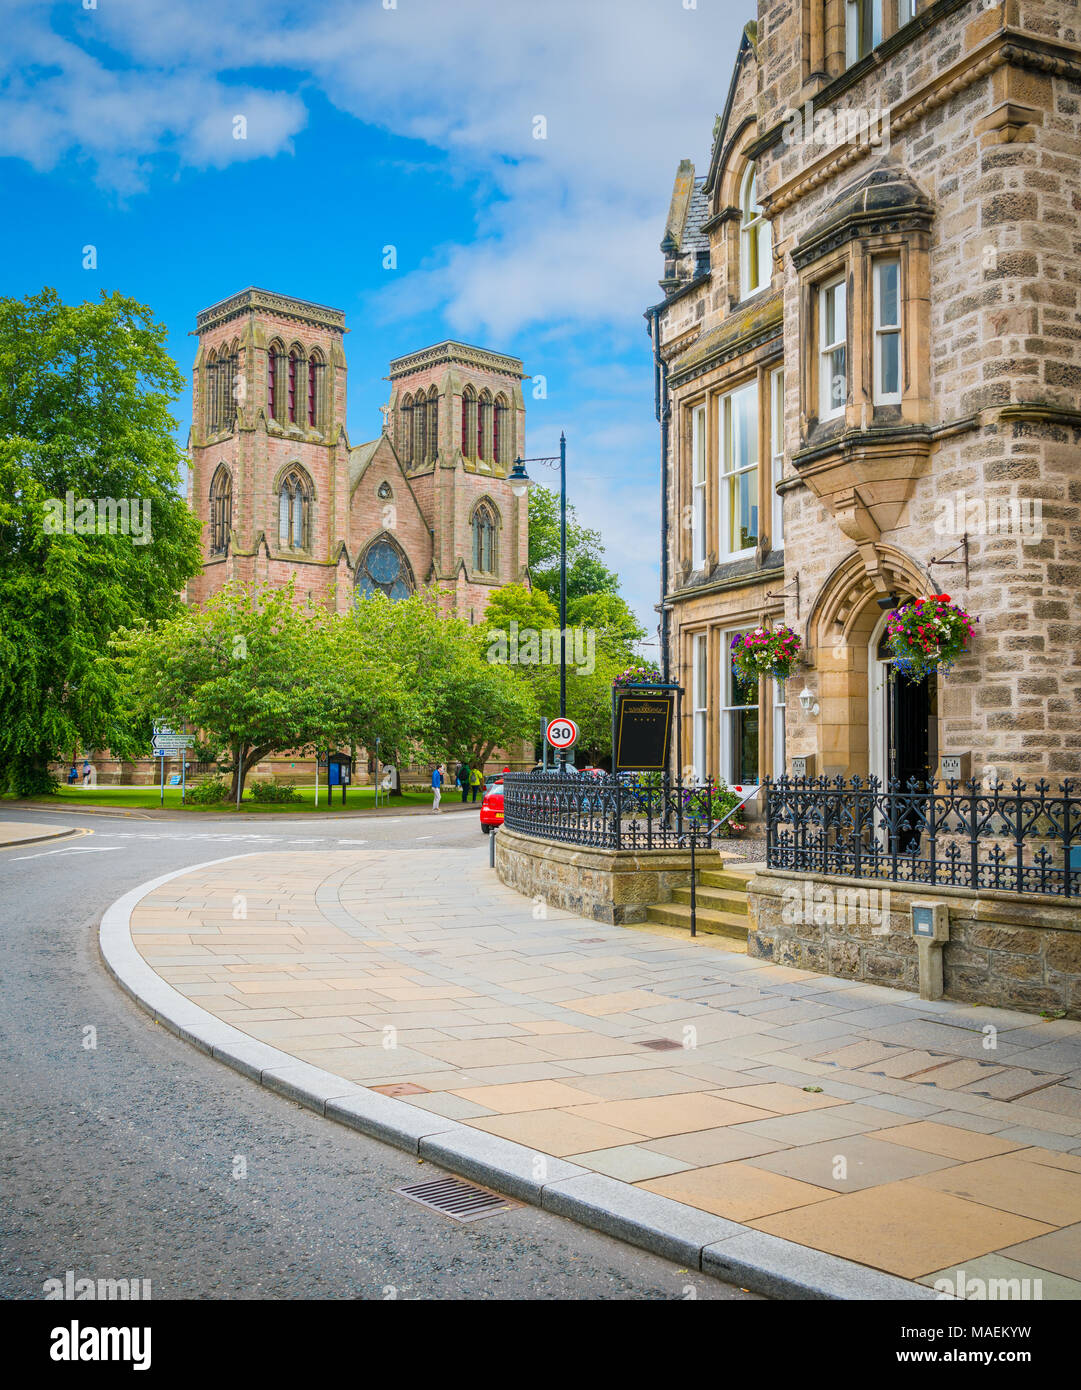 Saint Andrew's Cathedral in Inverness, Scottish Highlands. Stockfoto